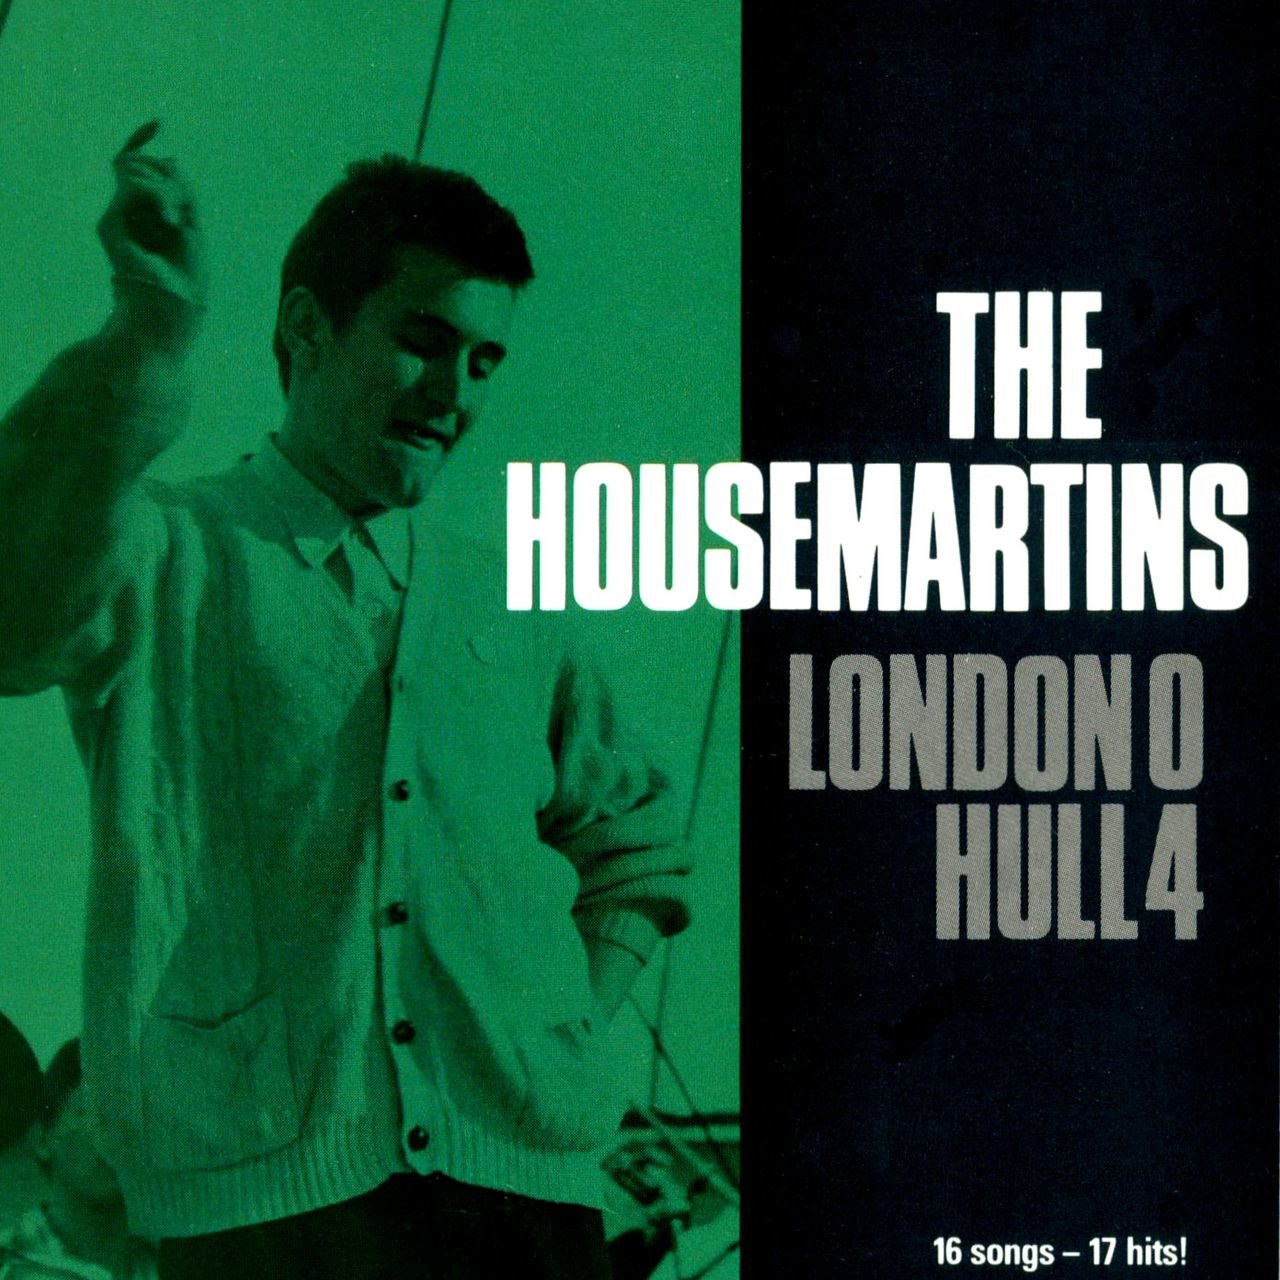 The Housemartins - London 0 Hull 4 Cover